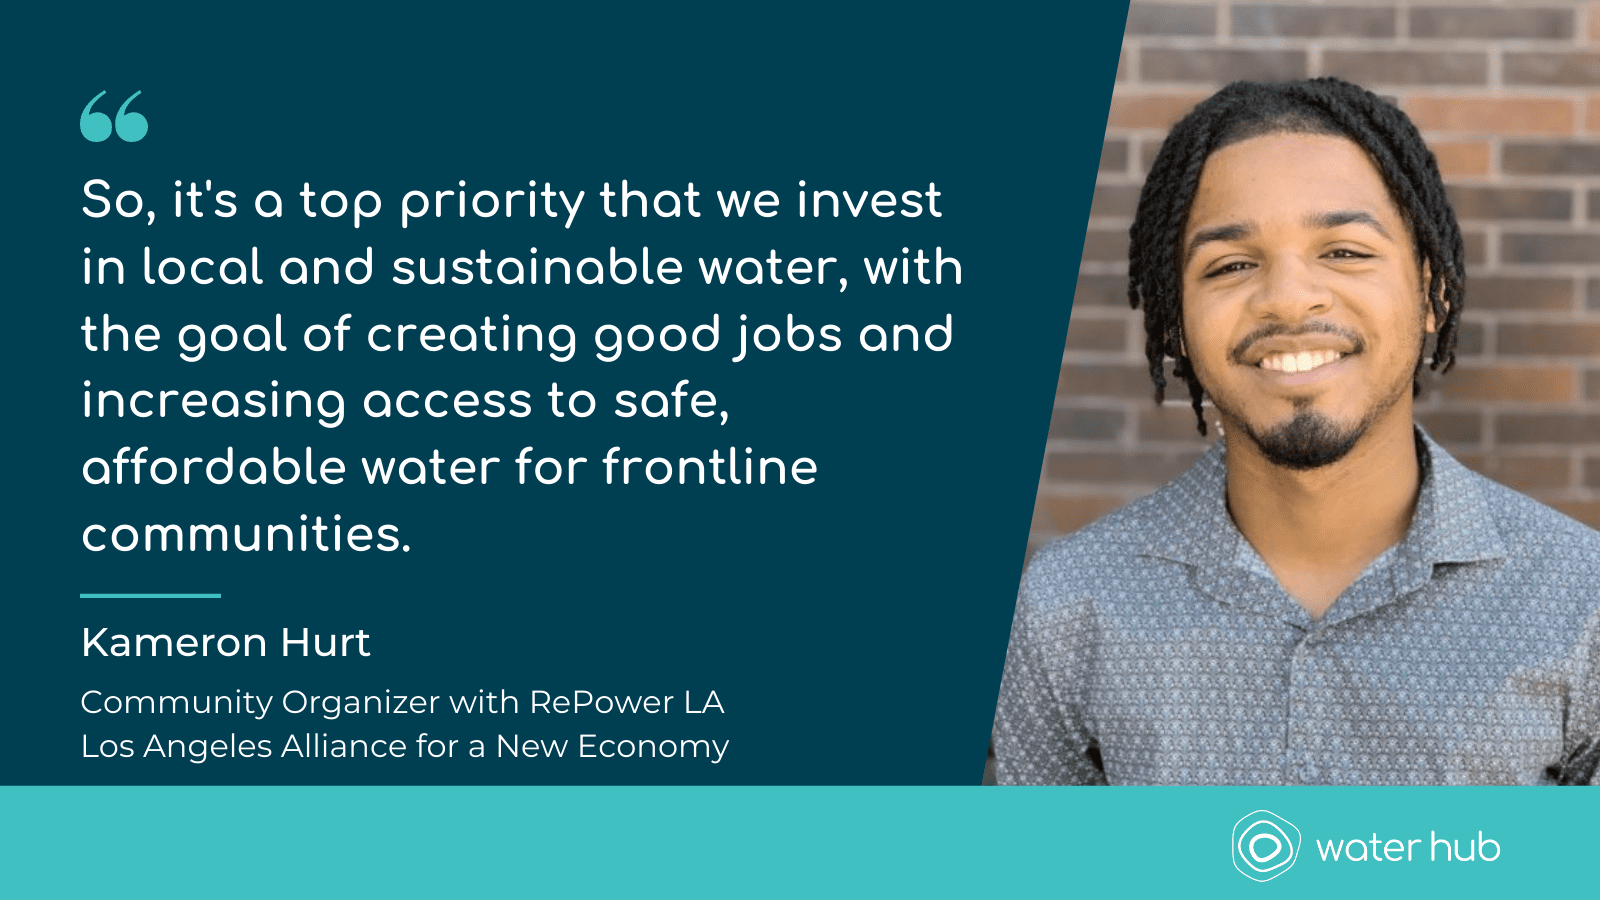 Quote graphic with photo of smiling man. Text: It's a top priority that we invest in local and sustainable water, with the goal of creating good jobs.